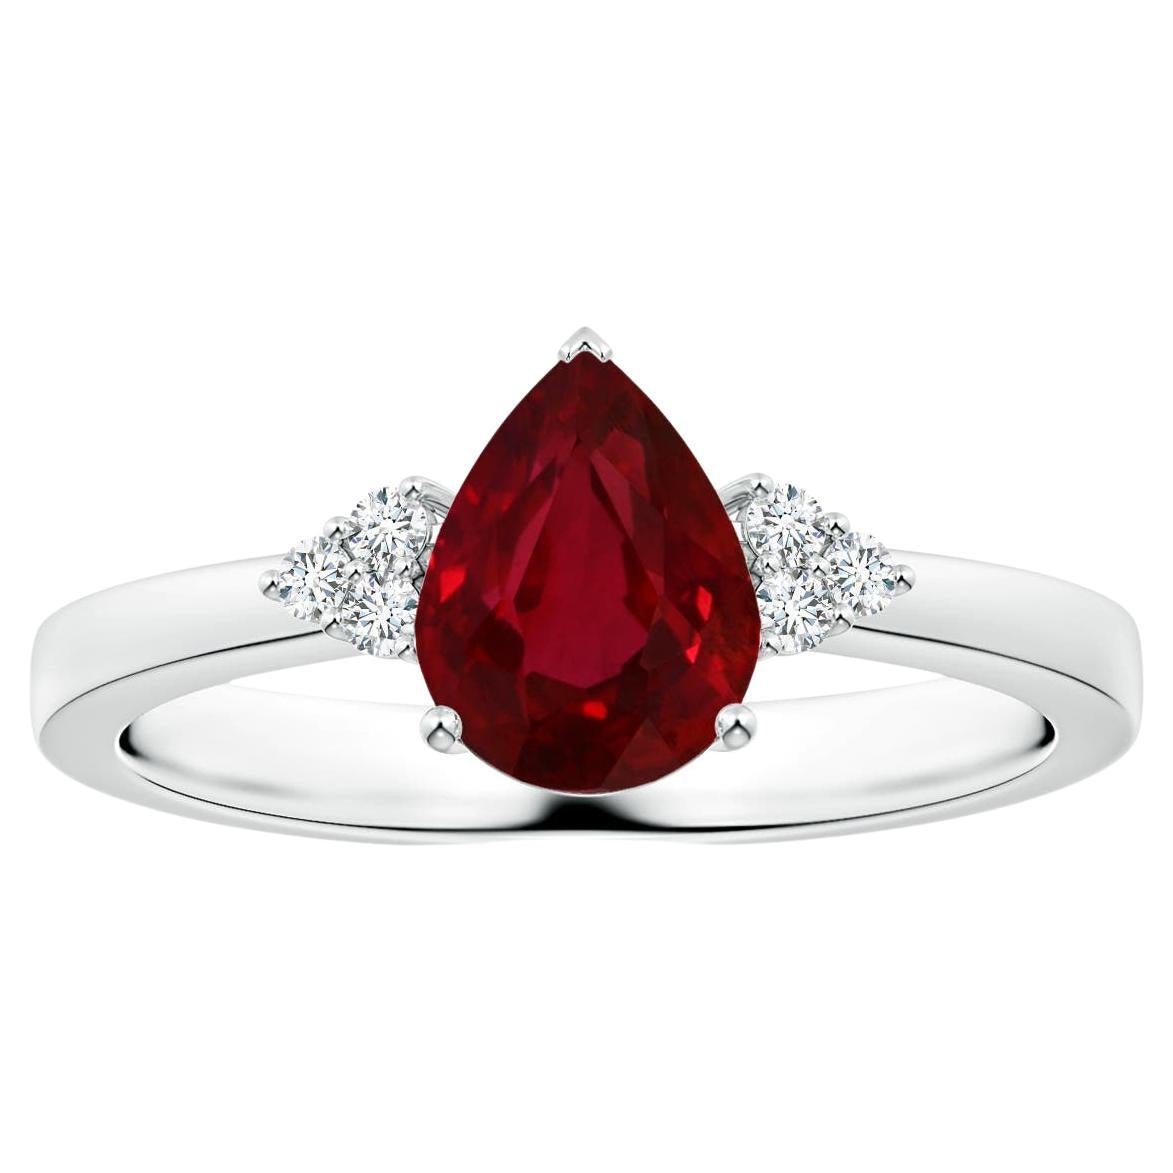 2.48 Carat Burma Origin Ruby Ring With Natural Gh-Vs Diamonds Set In White  Gold - Igi Certified at Rs 60000 | Chaman Bagh | Palanpur | ID:  2853136752862